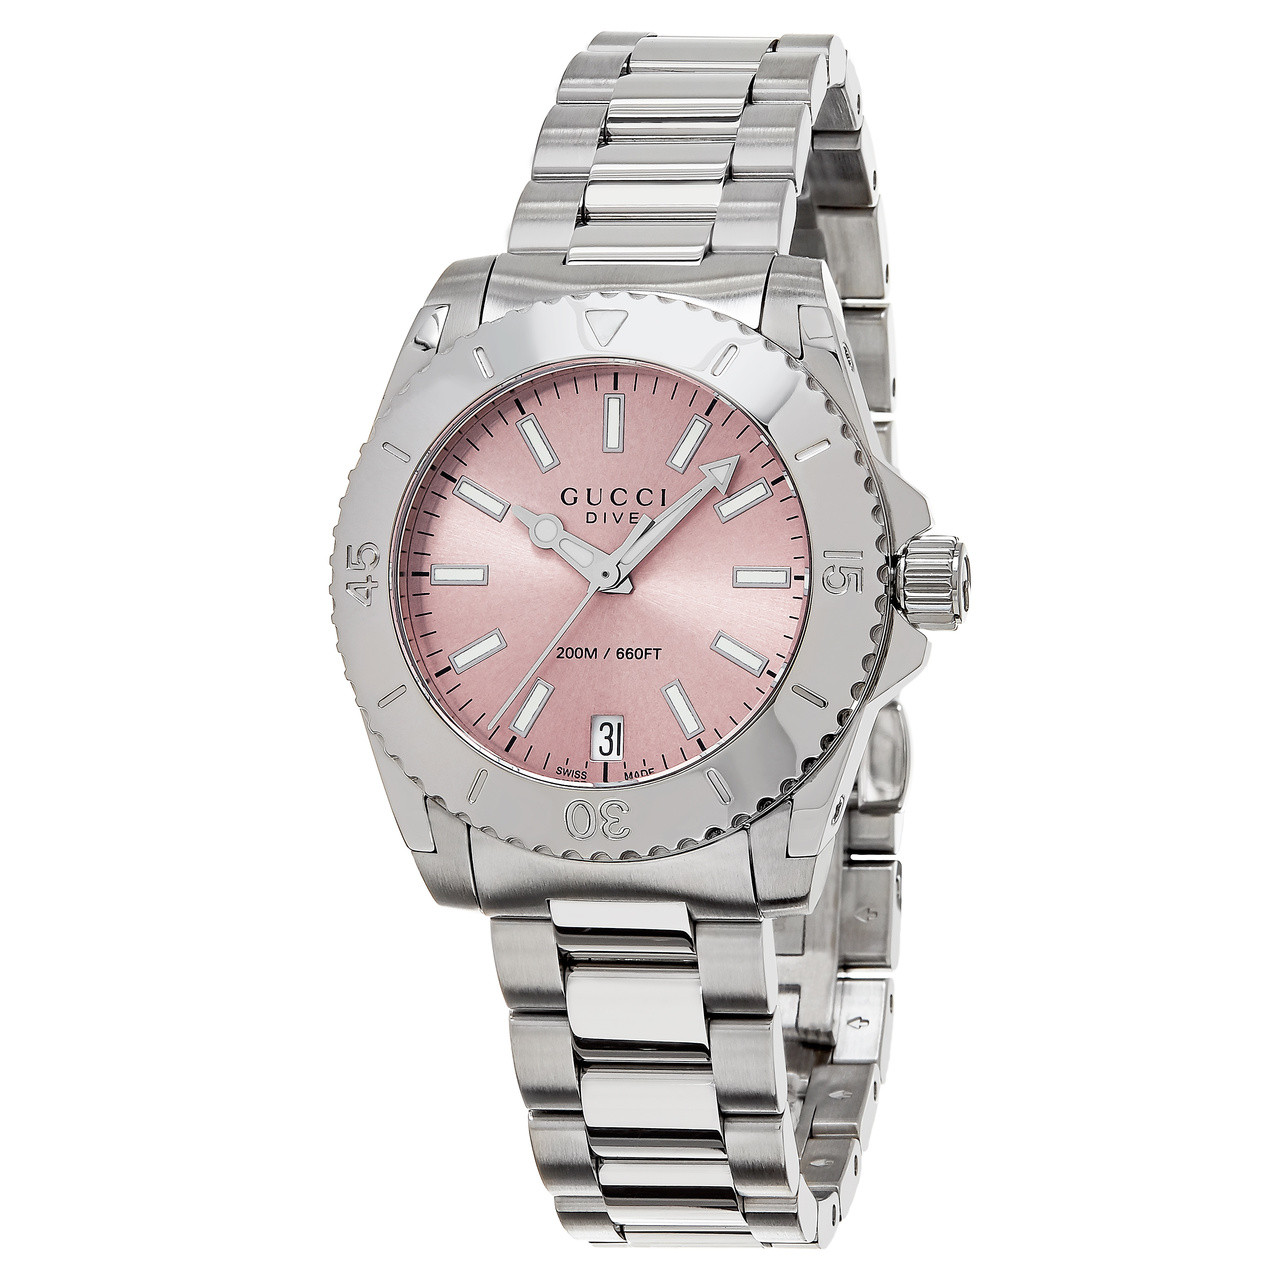 YA136401 'Dive' Stainless Steel Watch 